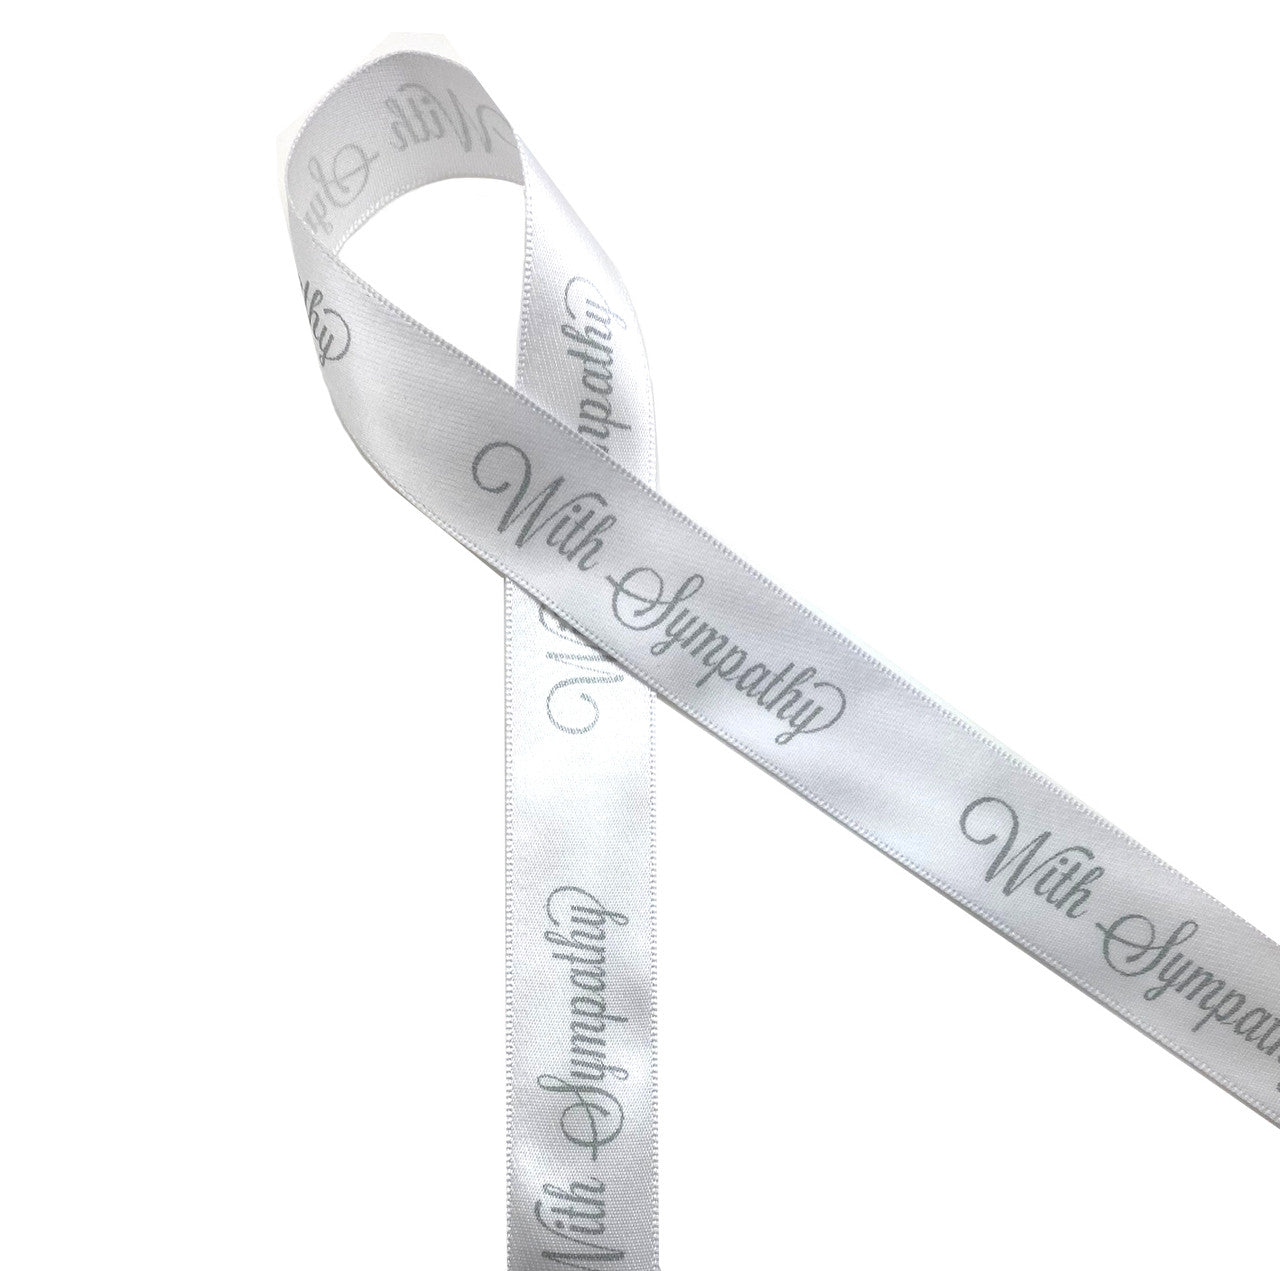 With Sympathy ribbon printed in gray on 7/8" white single face satin is the perfect way to express your sympathy at someone's time of sorrow.